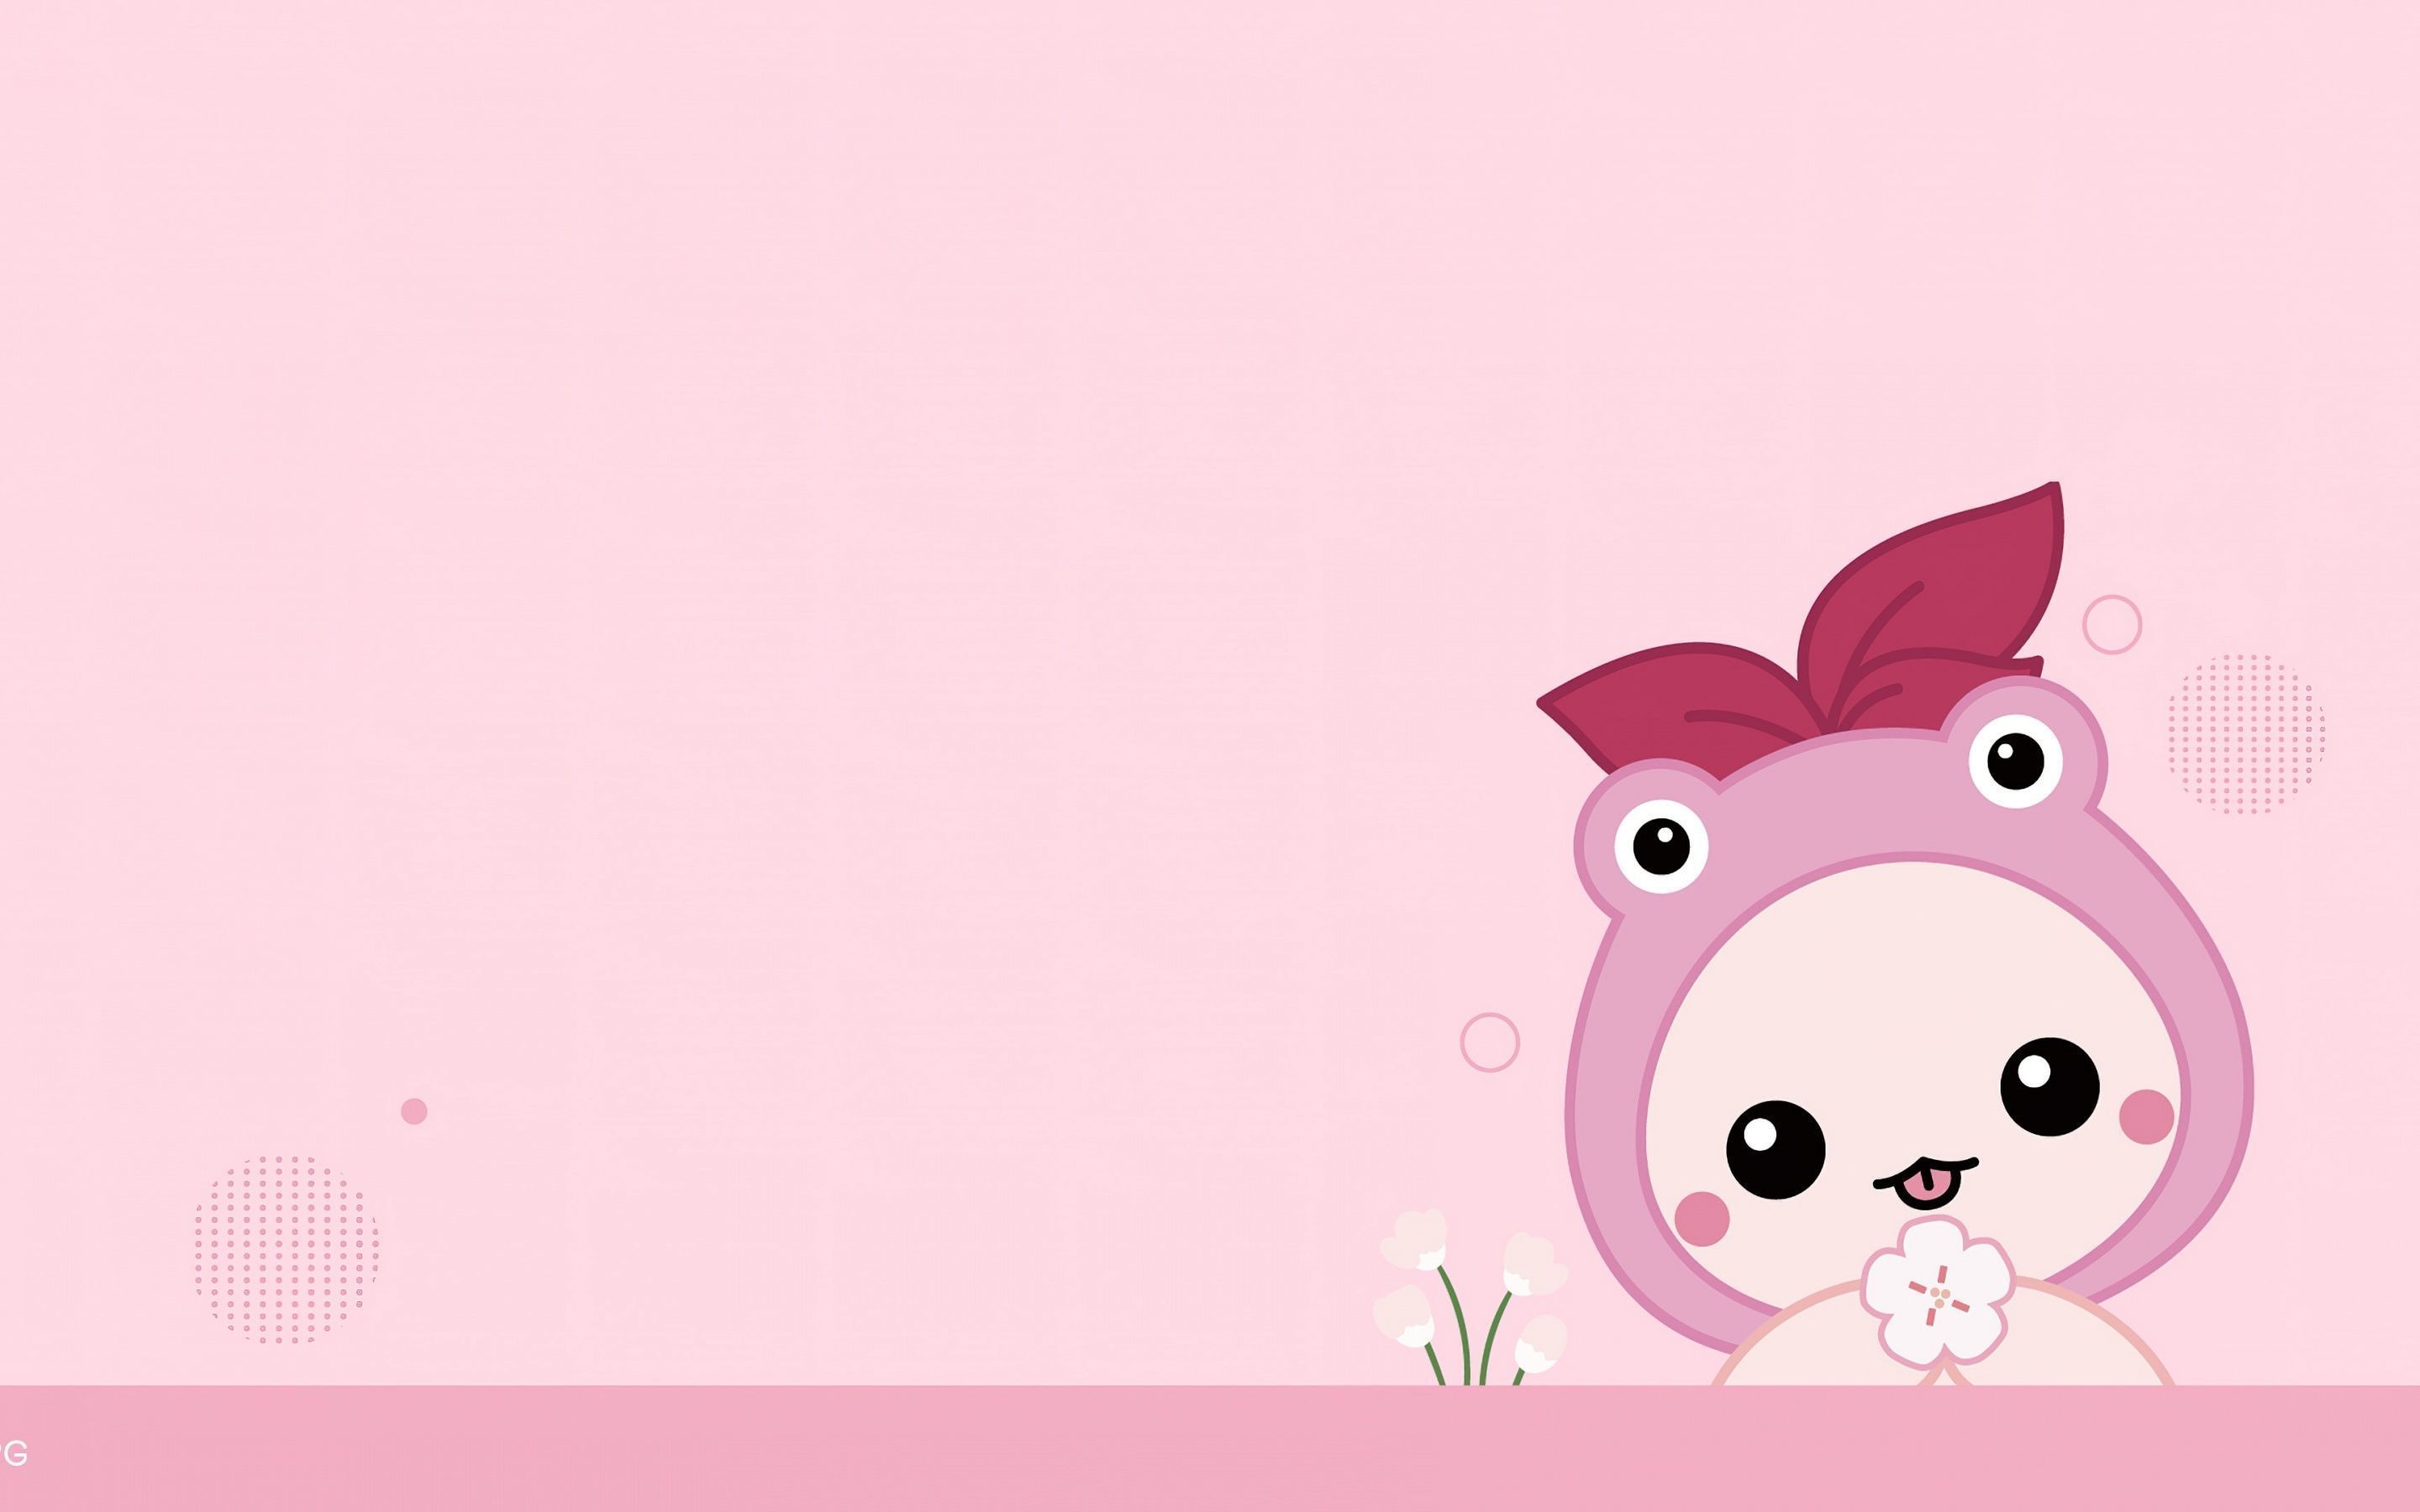 Cute Pink PC Wallpapers - Top Free Cute Pink PC Backgrounds ...